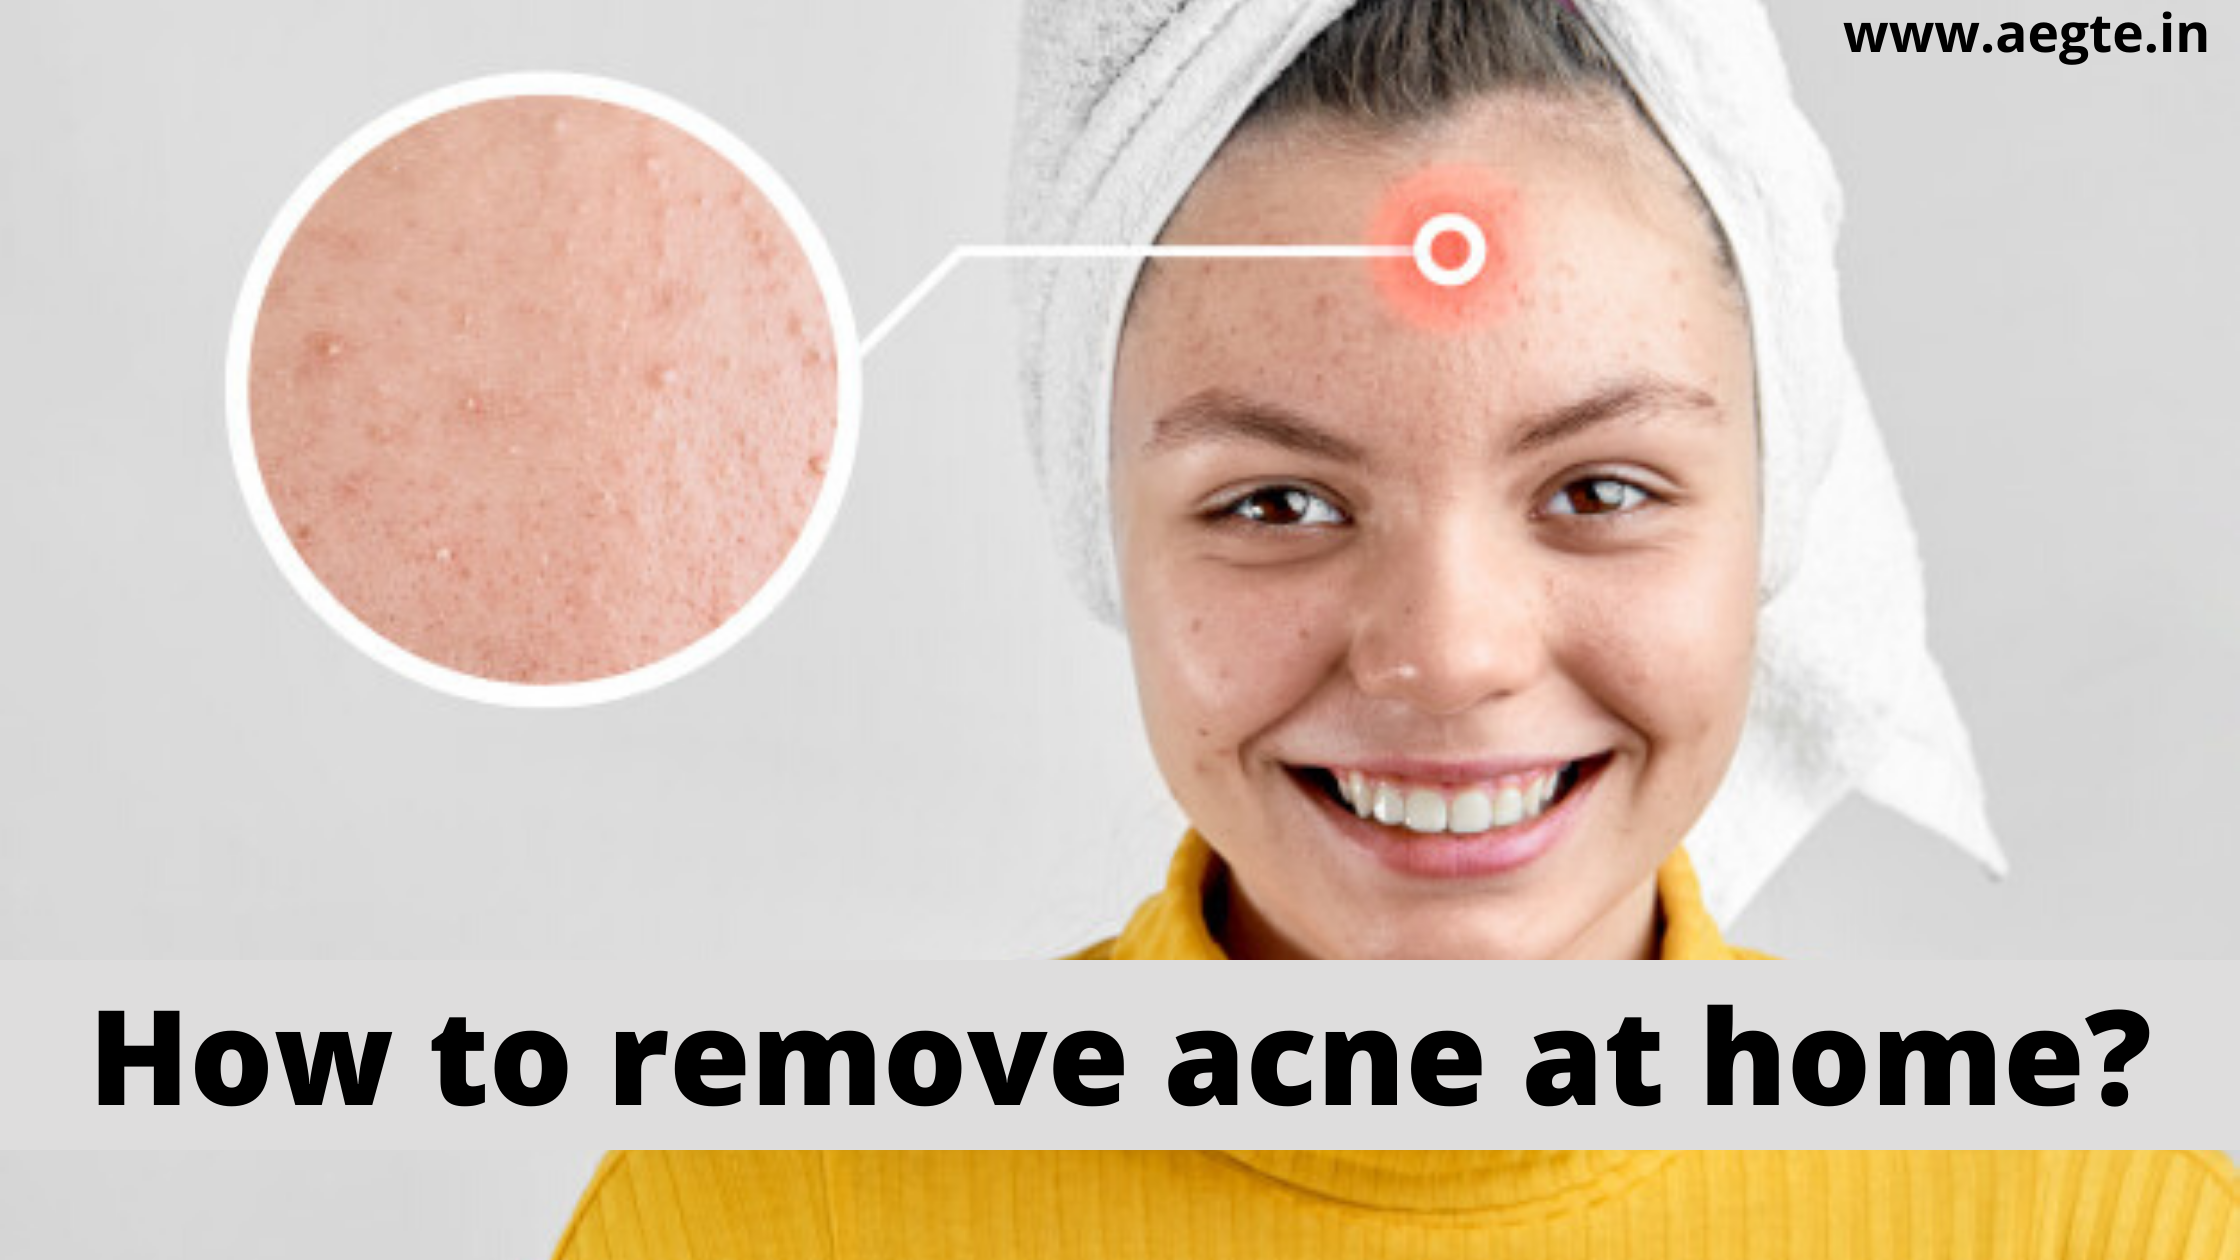 How to remove acne at home?